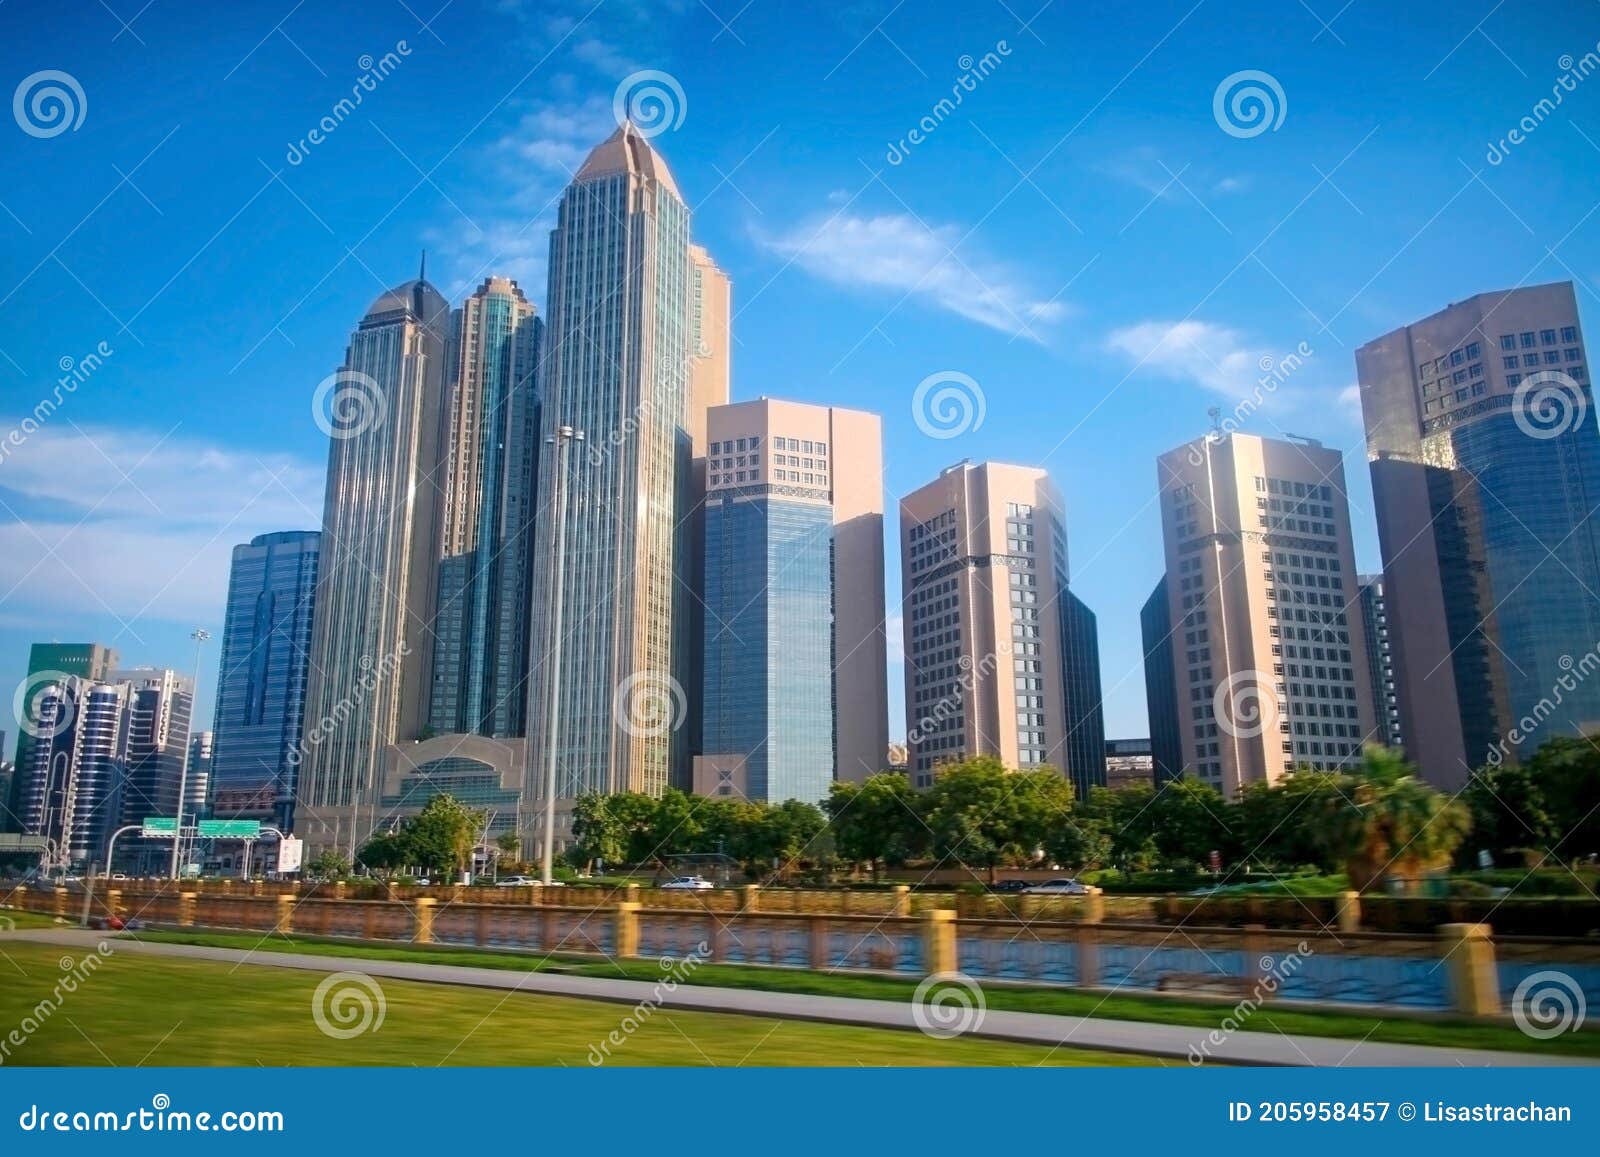 skyscrappers in the downtown city of abu dhabi, united arab emirates